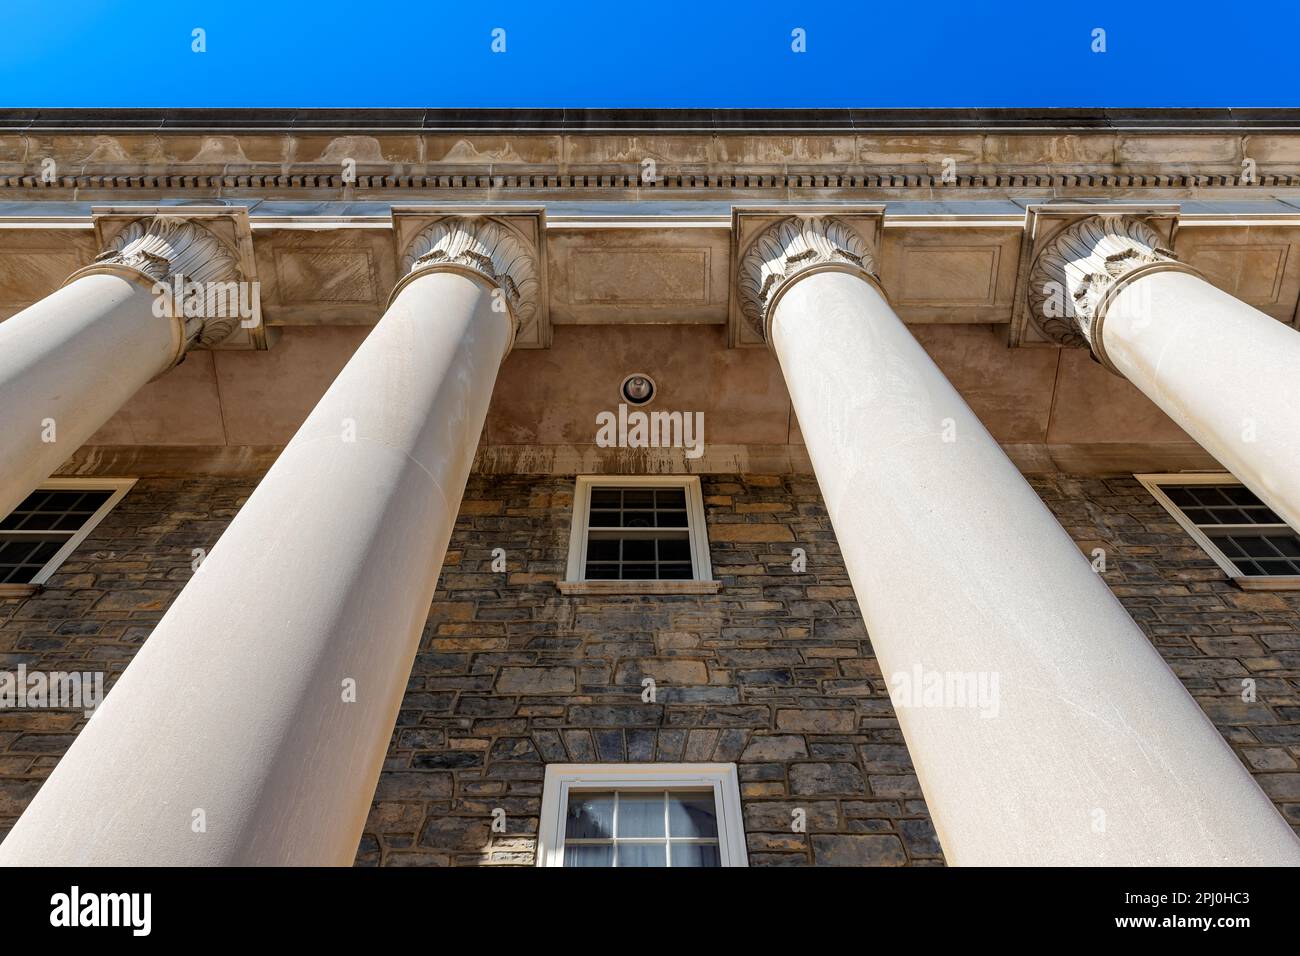 Facade with columns of the campus of State University Stock Photo